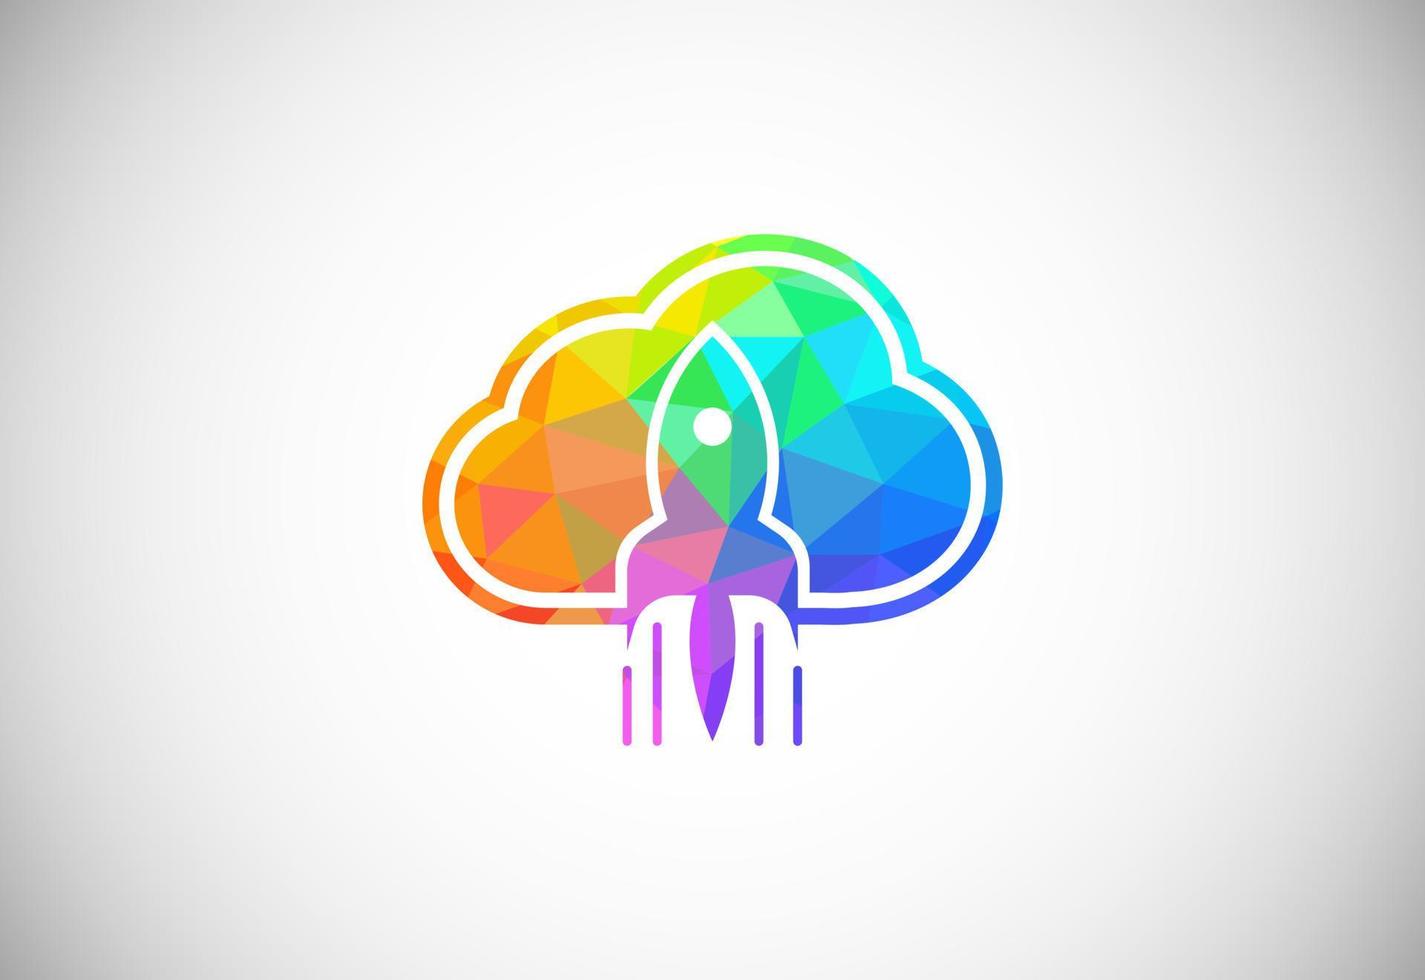 Polygonal low poly cloud computing logo. Colorful abstract triangles style cloud icon. vector